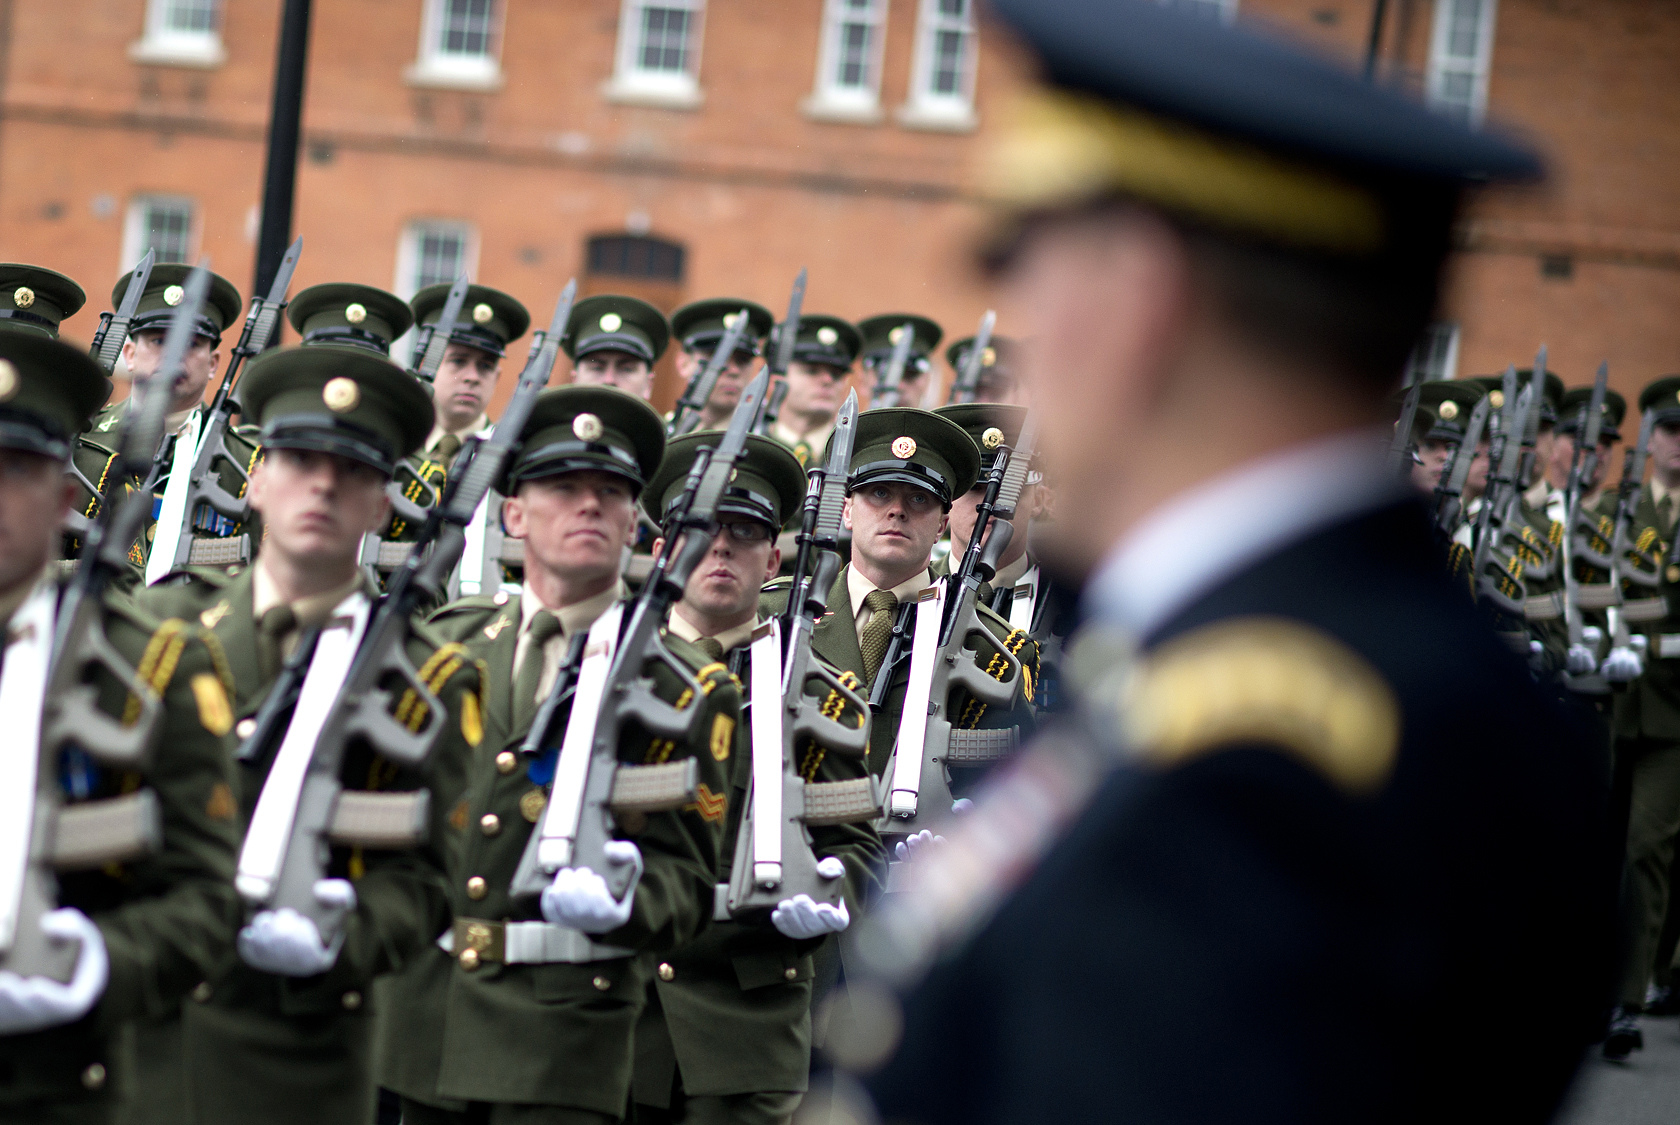 Army Gen. Martin E. Dempsey, chairman of the Joint Chiefs of Staff, reviews the Irish Honor Guard at Brugha Barracks in Dublin, Ireland, Aug. 31, 2012. DOD photo by D. Myles Cullen